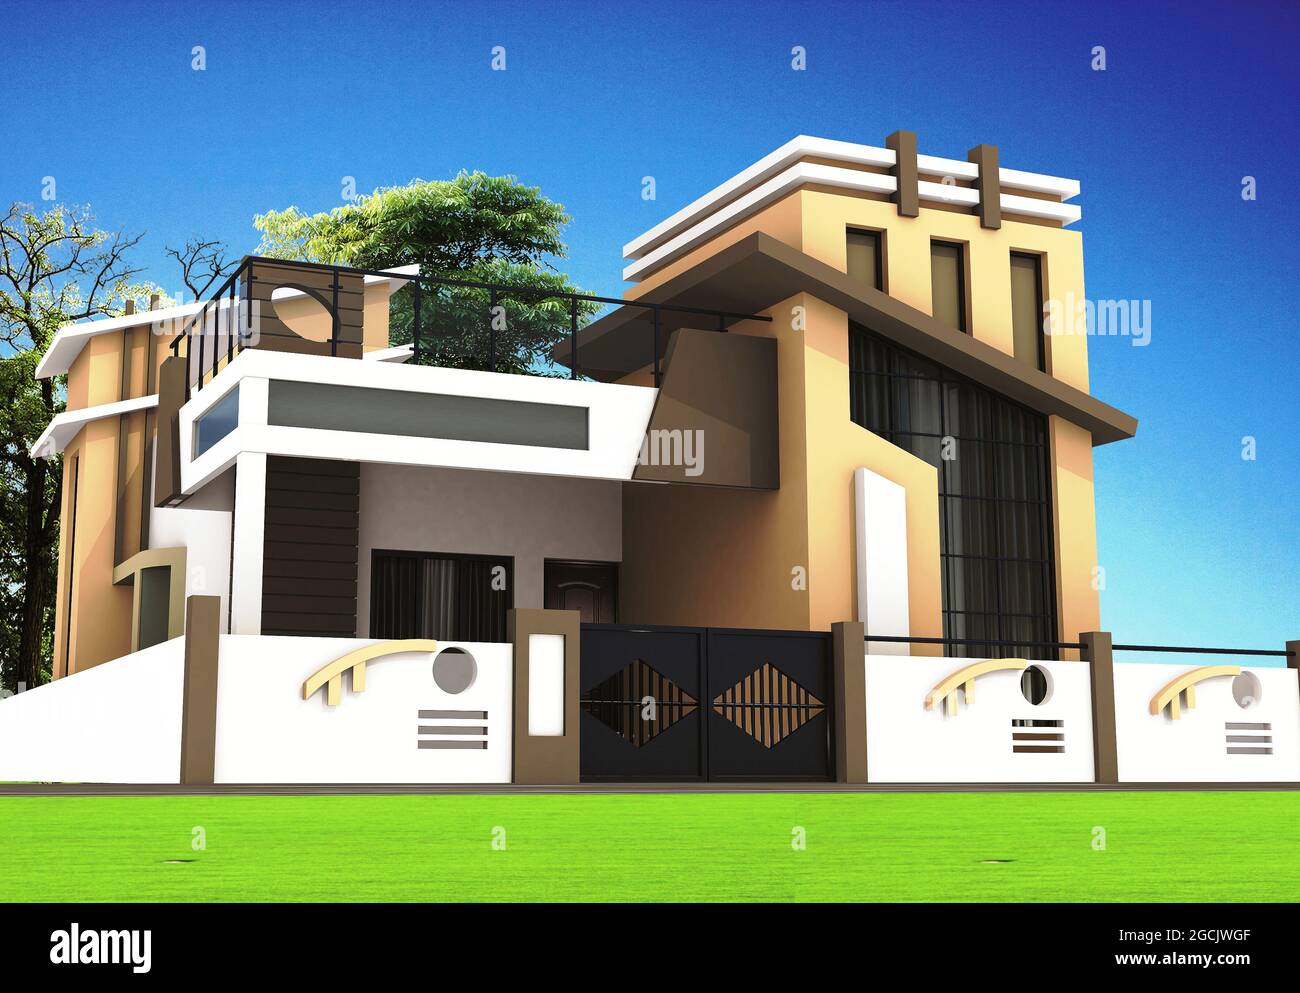 3D rendering of a duplex house with an abstract design Stock Photo ...